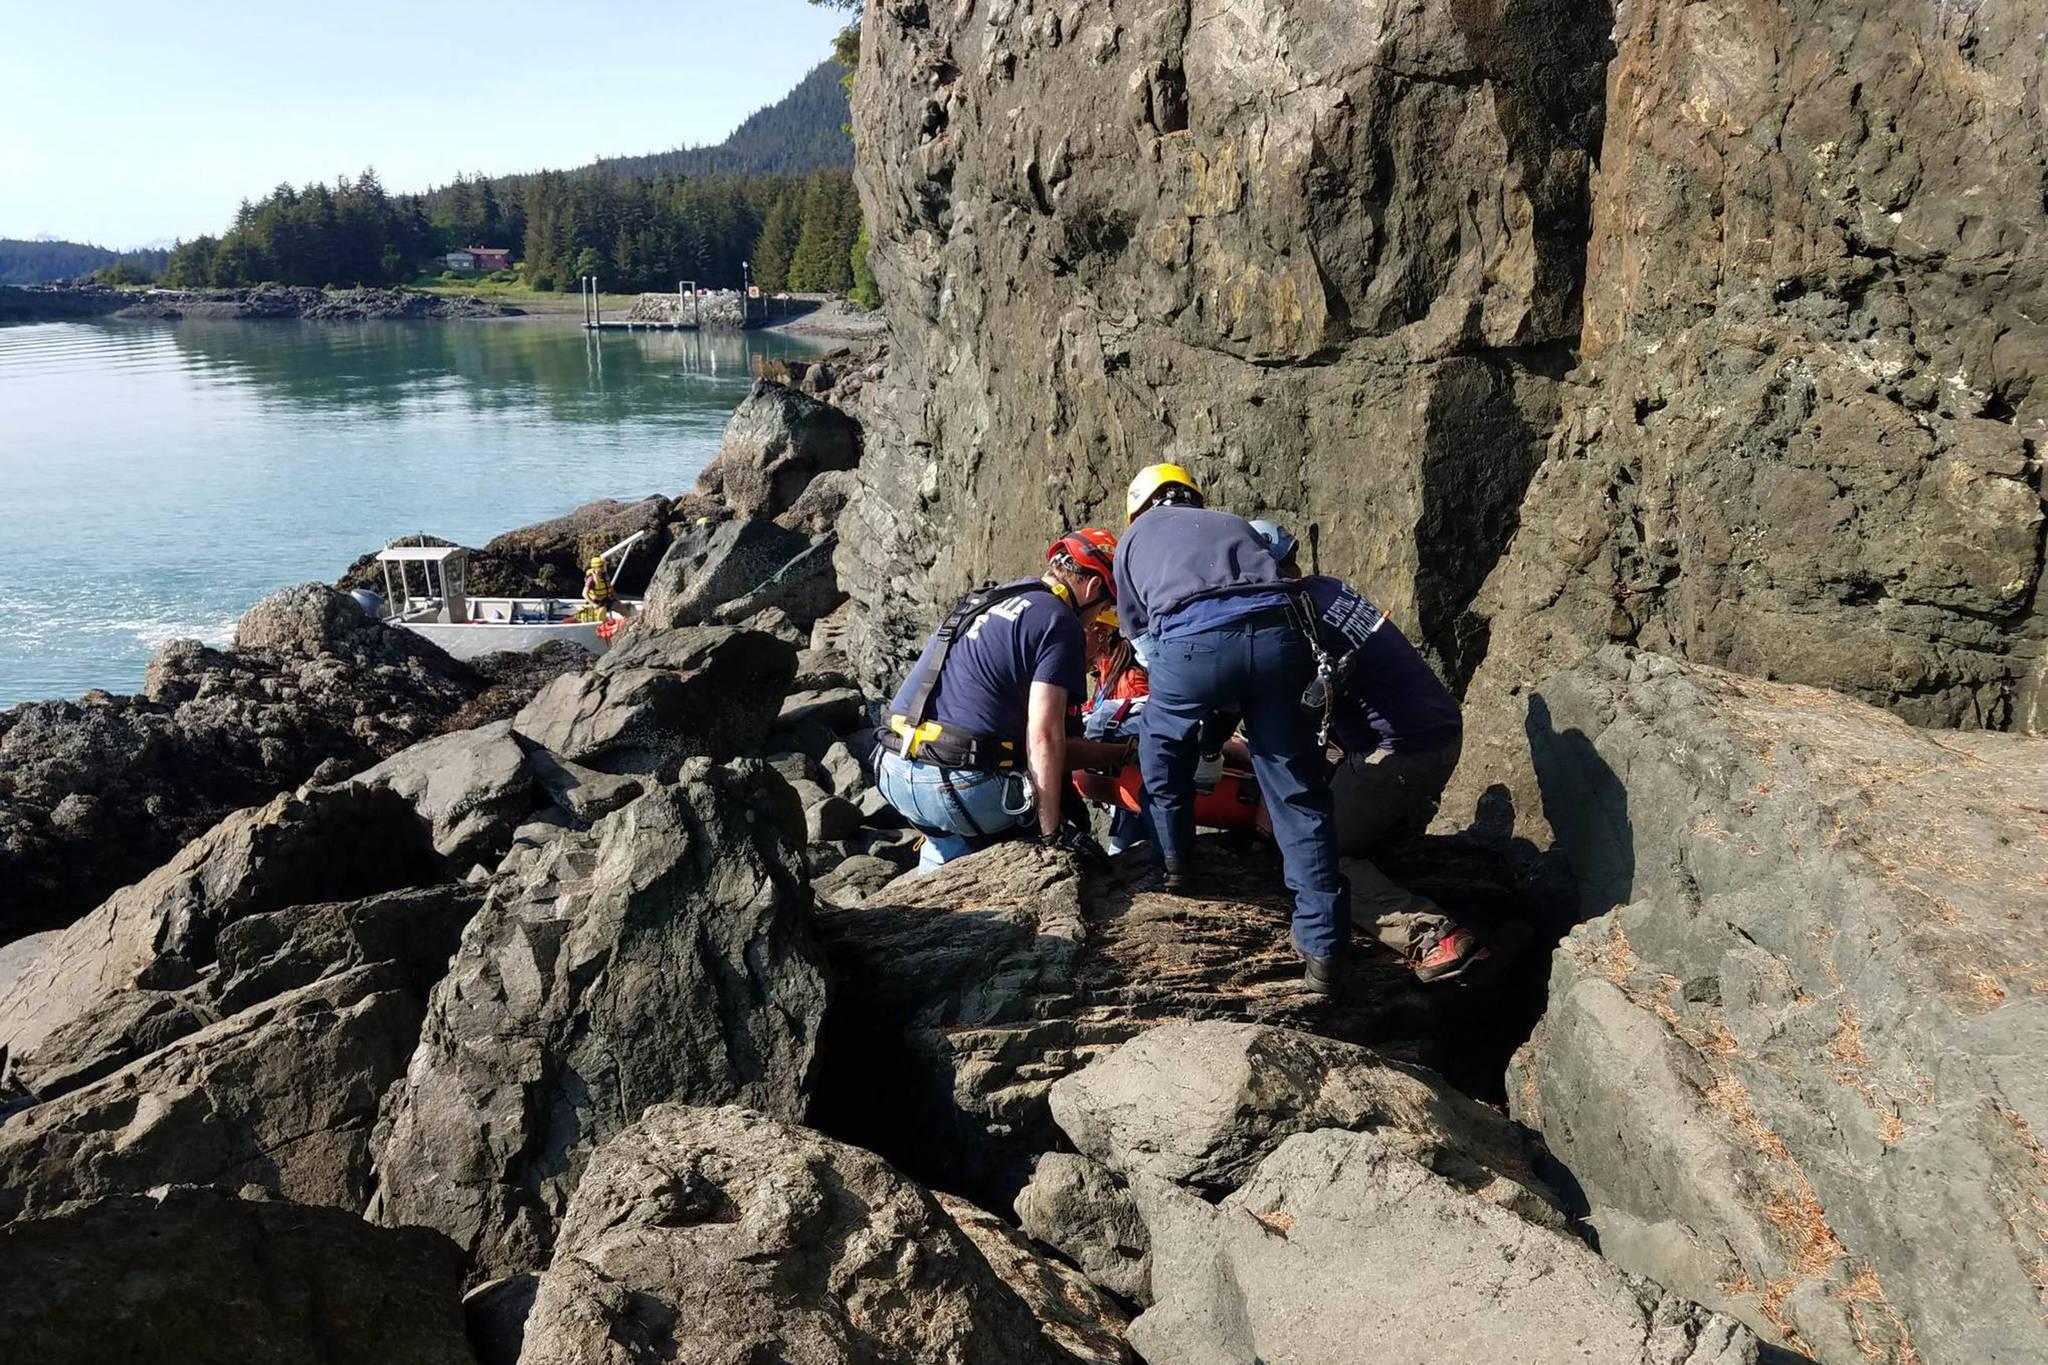 Capital City Fire/Rescue personnel prepare to load Juneau man Chuck Sidlinger into a rescue boat after he fell from a trail on Wednesday, May 29, 2019. (Courtesy photo | Meredith Trainor)